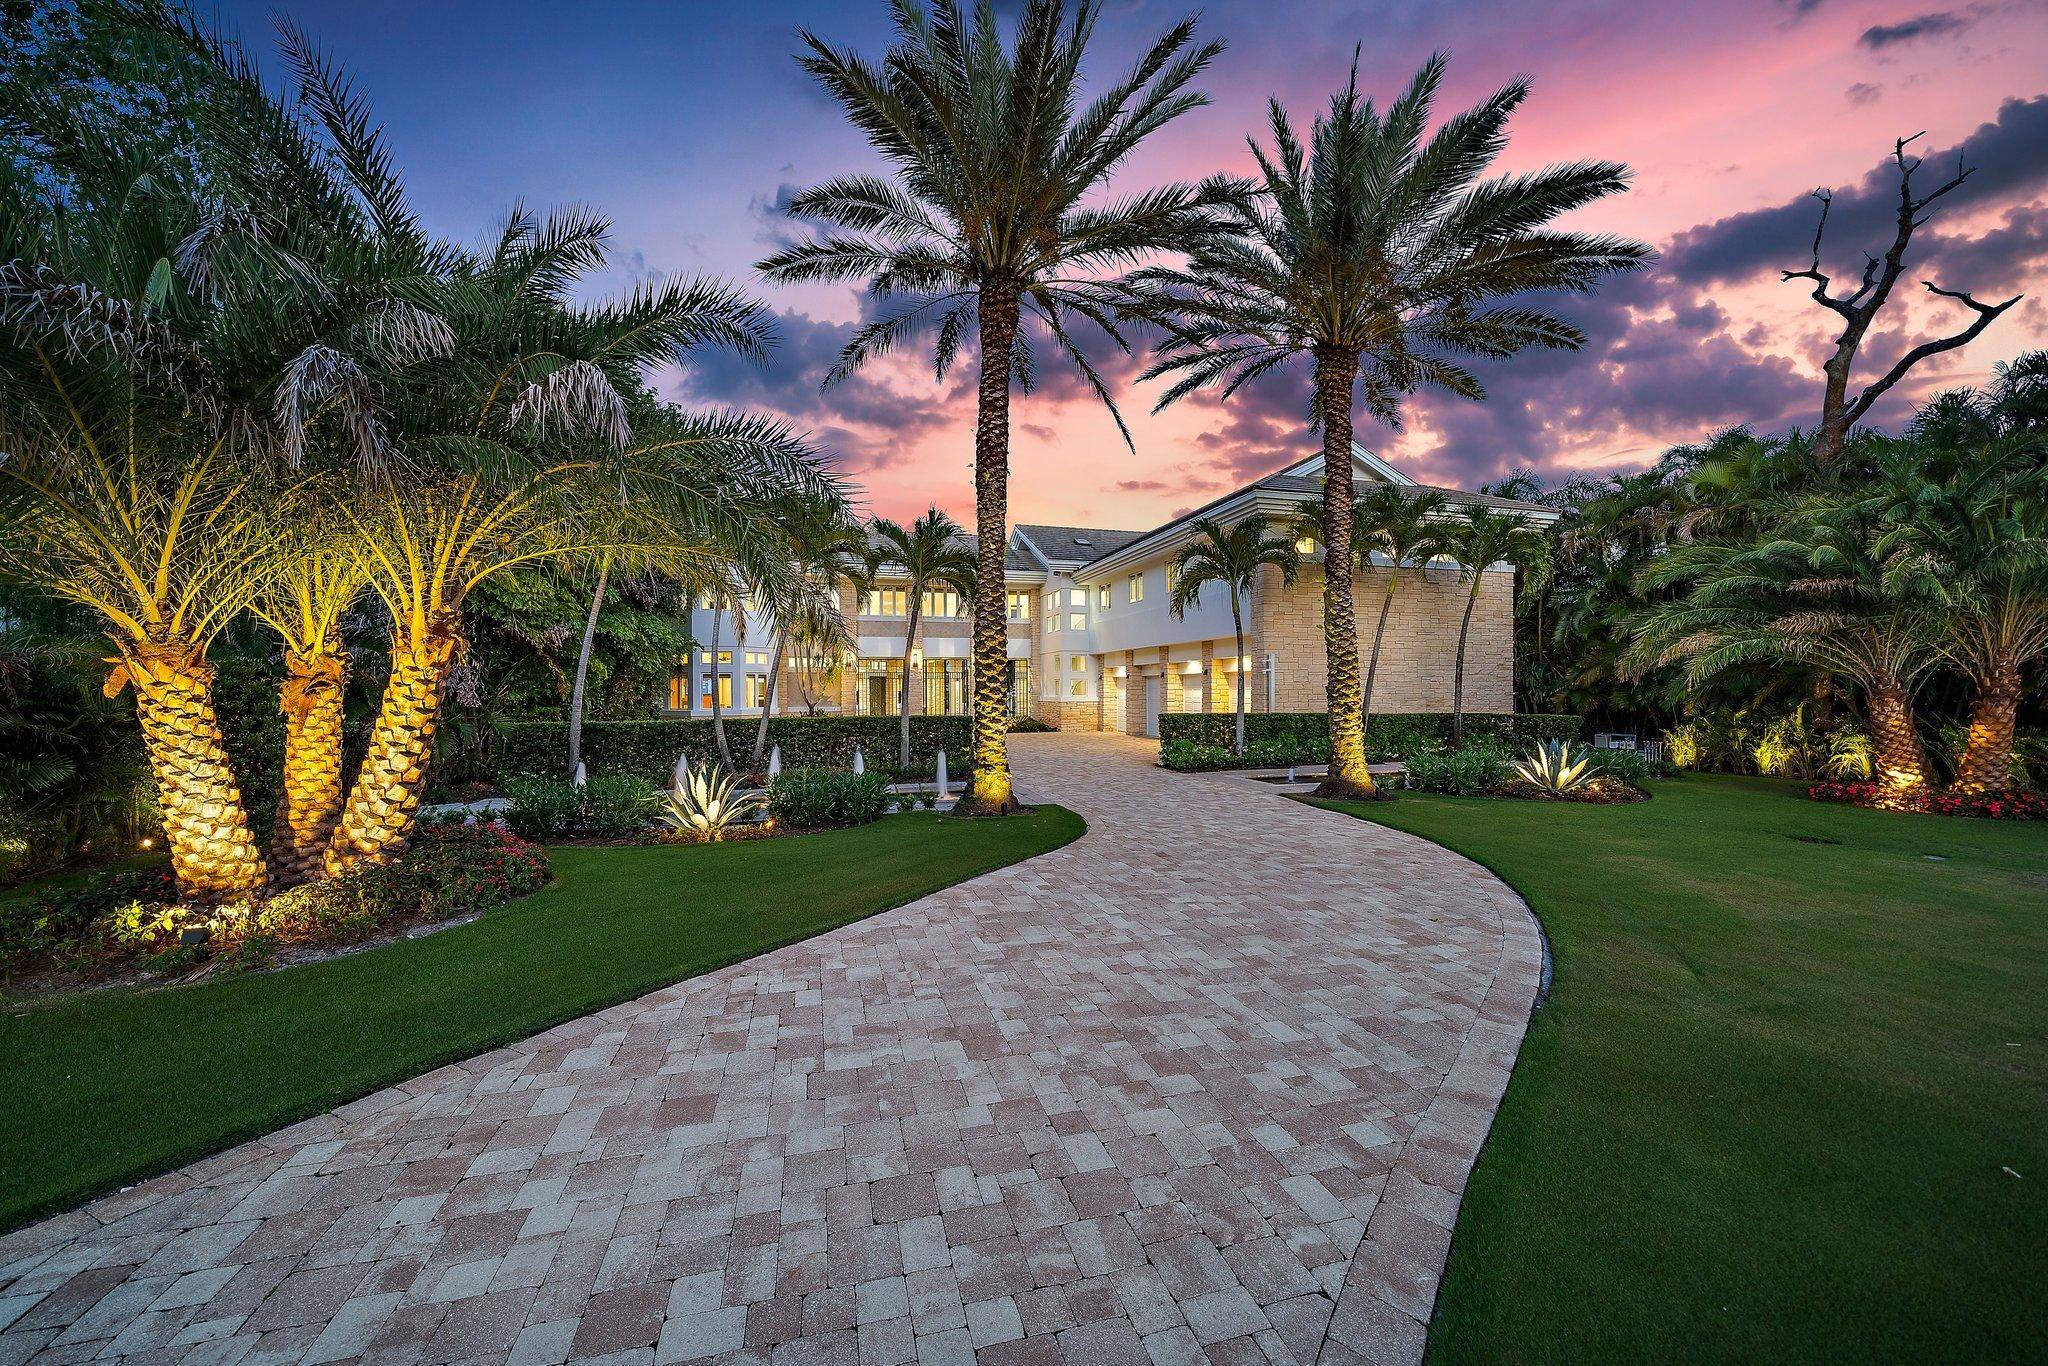 Stunning palatial modern Intracoastal home with over 9, 300 interior SF and 106' of direct deepwater frontage !